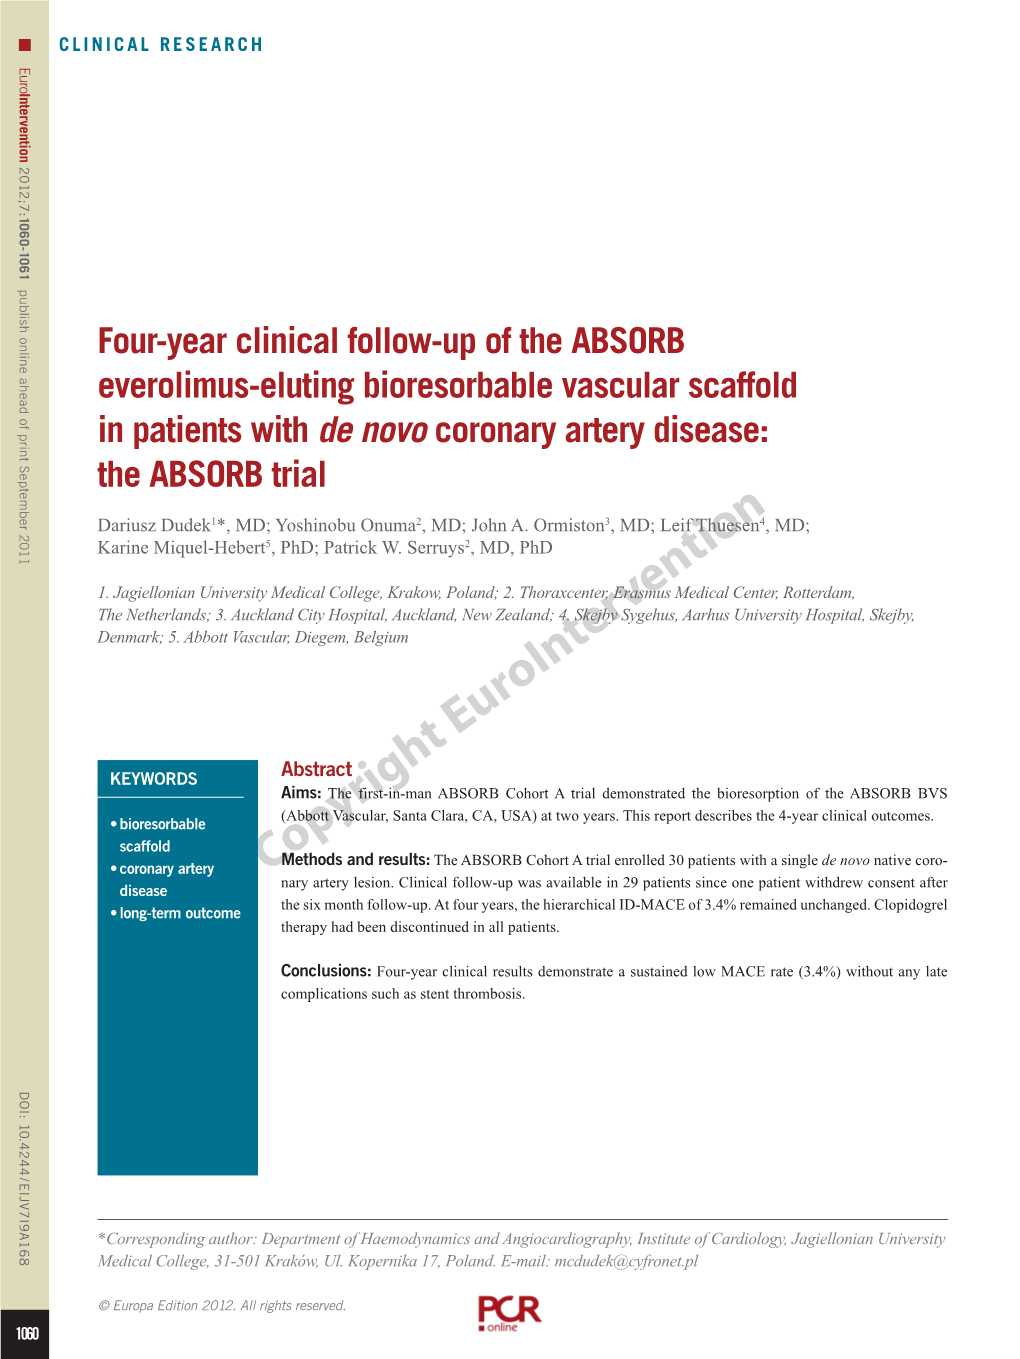 Four-Year Clinical Follow-Up of the ABSORB Everolimus-Eluting Bioresorbable Vascular Scaffold in Patients with De Novo Coronary Artery Disease: the ABSORB Trial